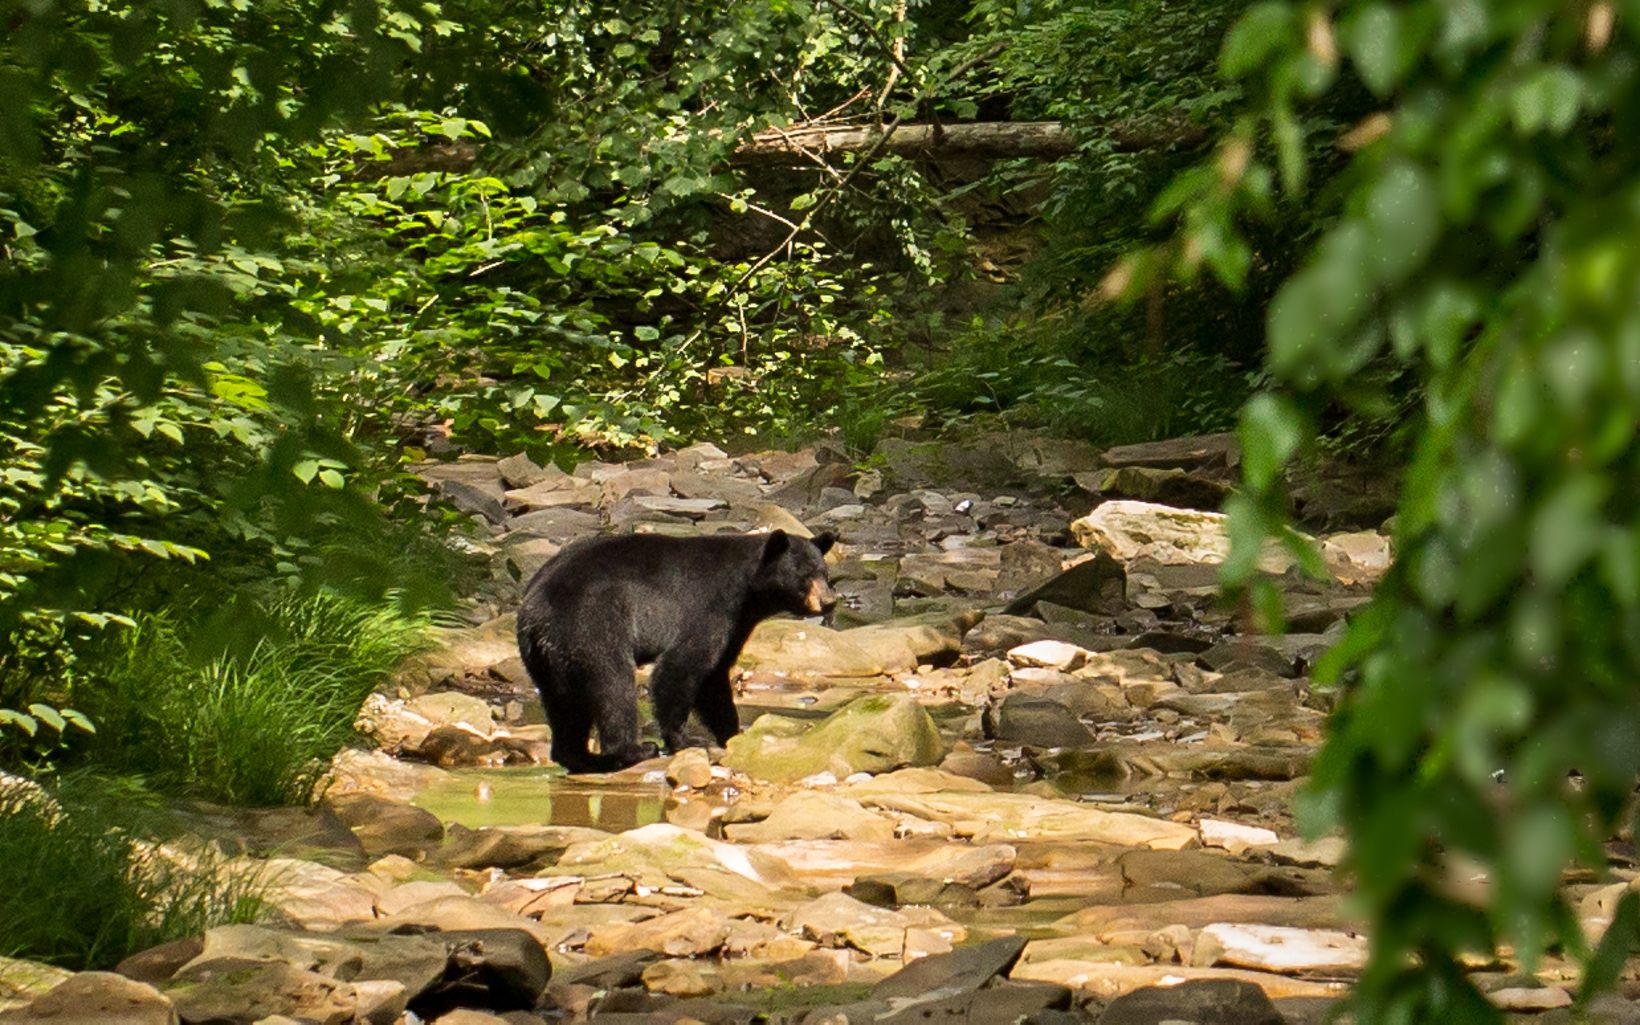 Black Bear Sighting This year, a young male black bear was spotted at our Edge of Appalachia Preserve, which means our efforts to create protected wildlife corridors are paying off! © David and Laura Hughes